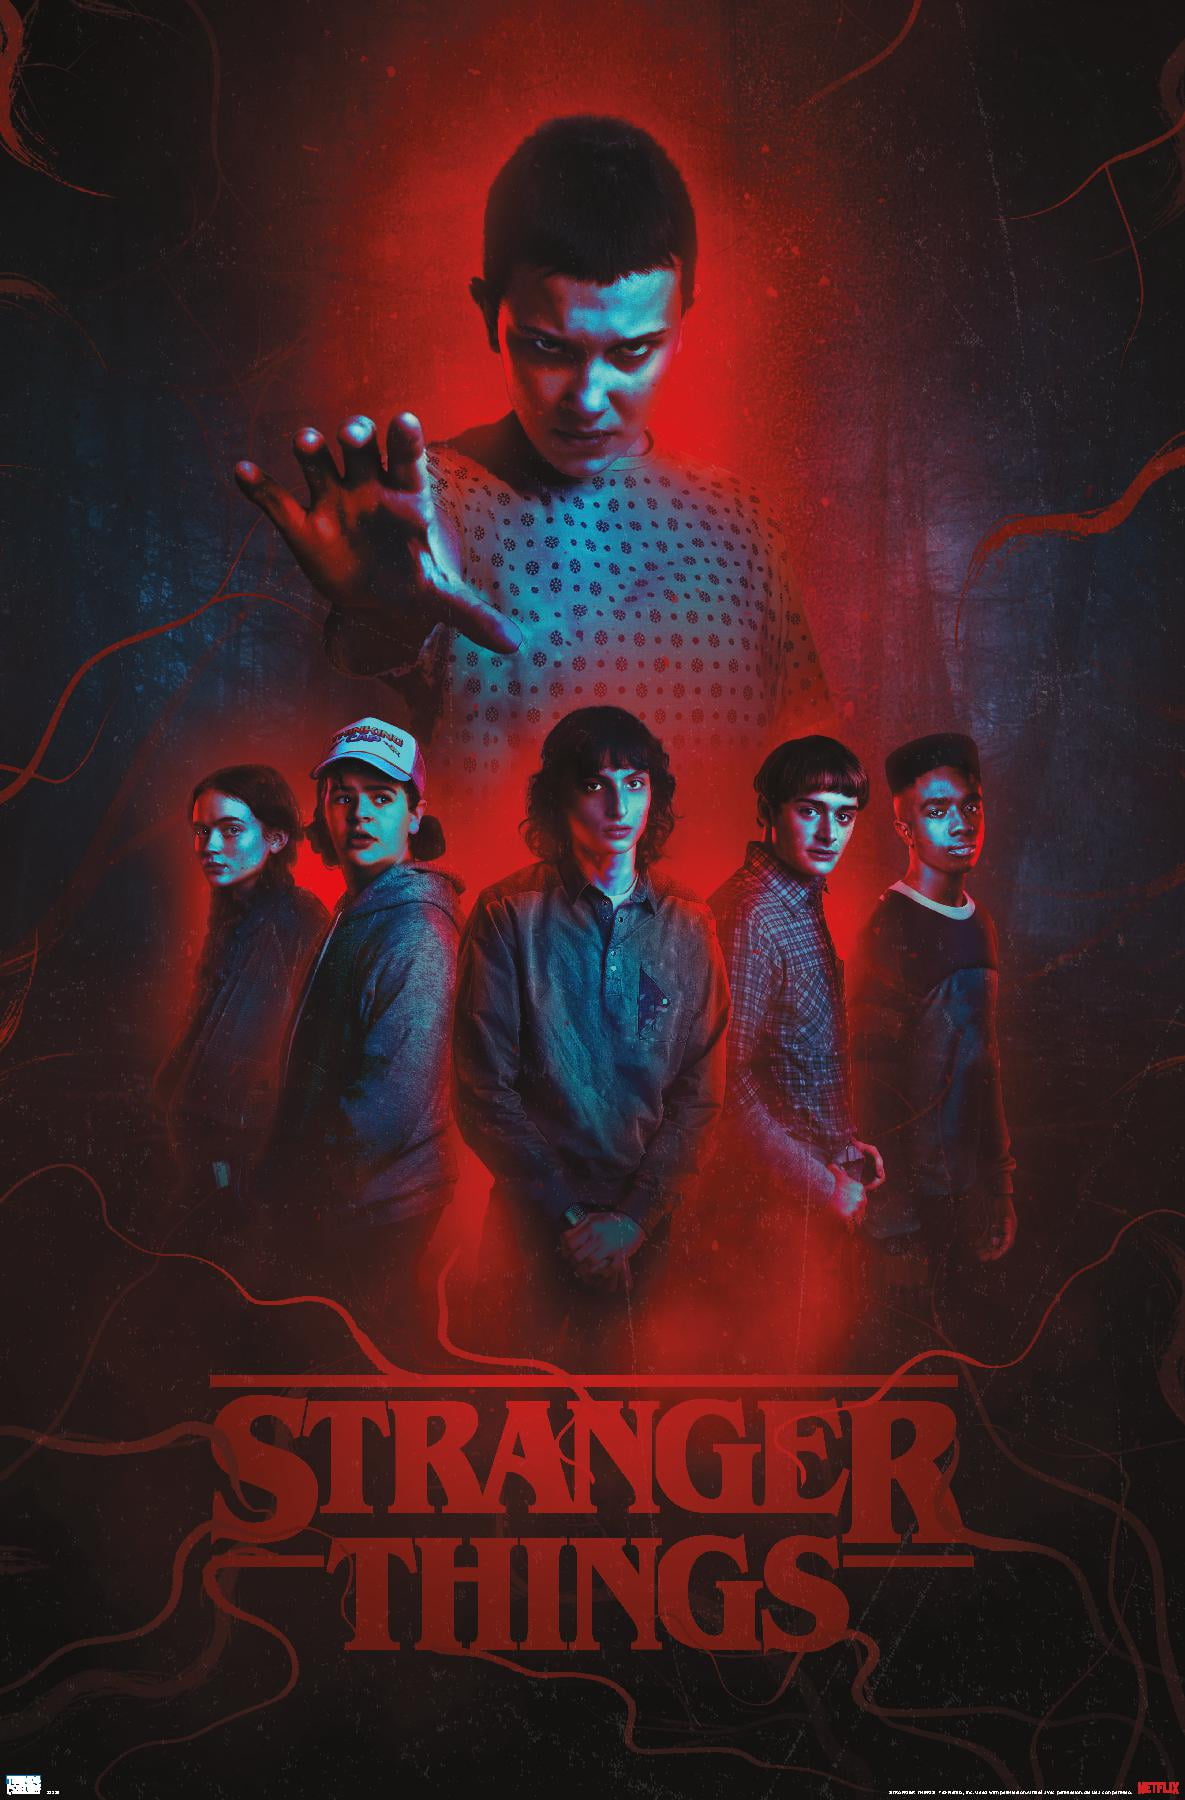  Set of 2 Stranger Things Show Season 1 and 2 Fan Collection  Poster Set Bundle 24x36 inch: Posters & Prints